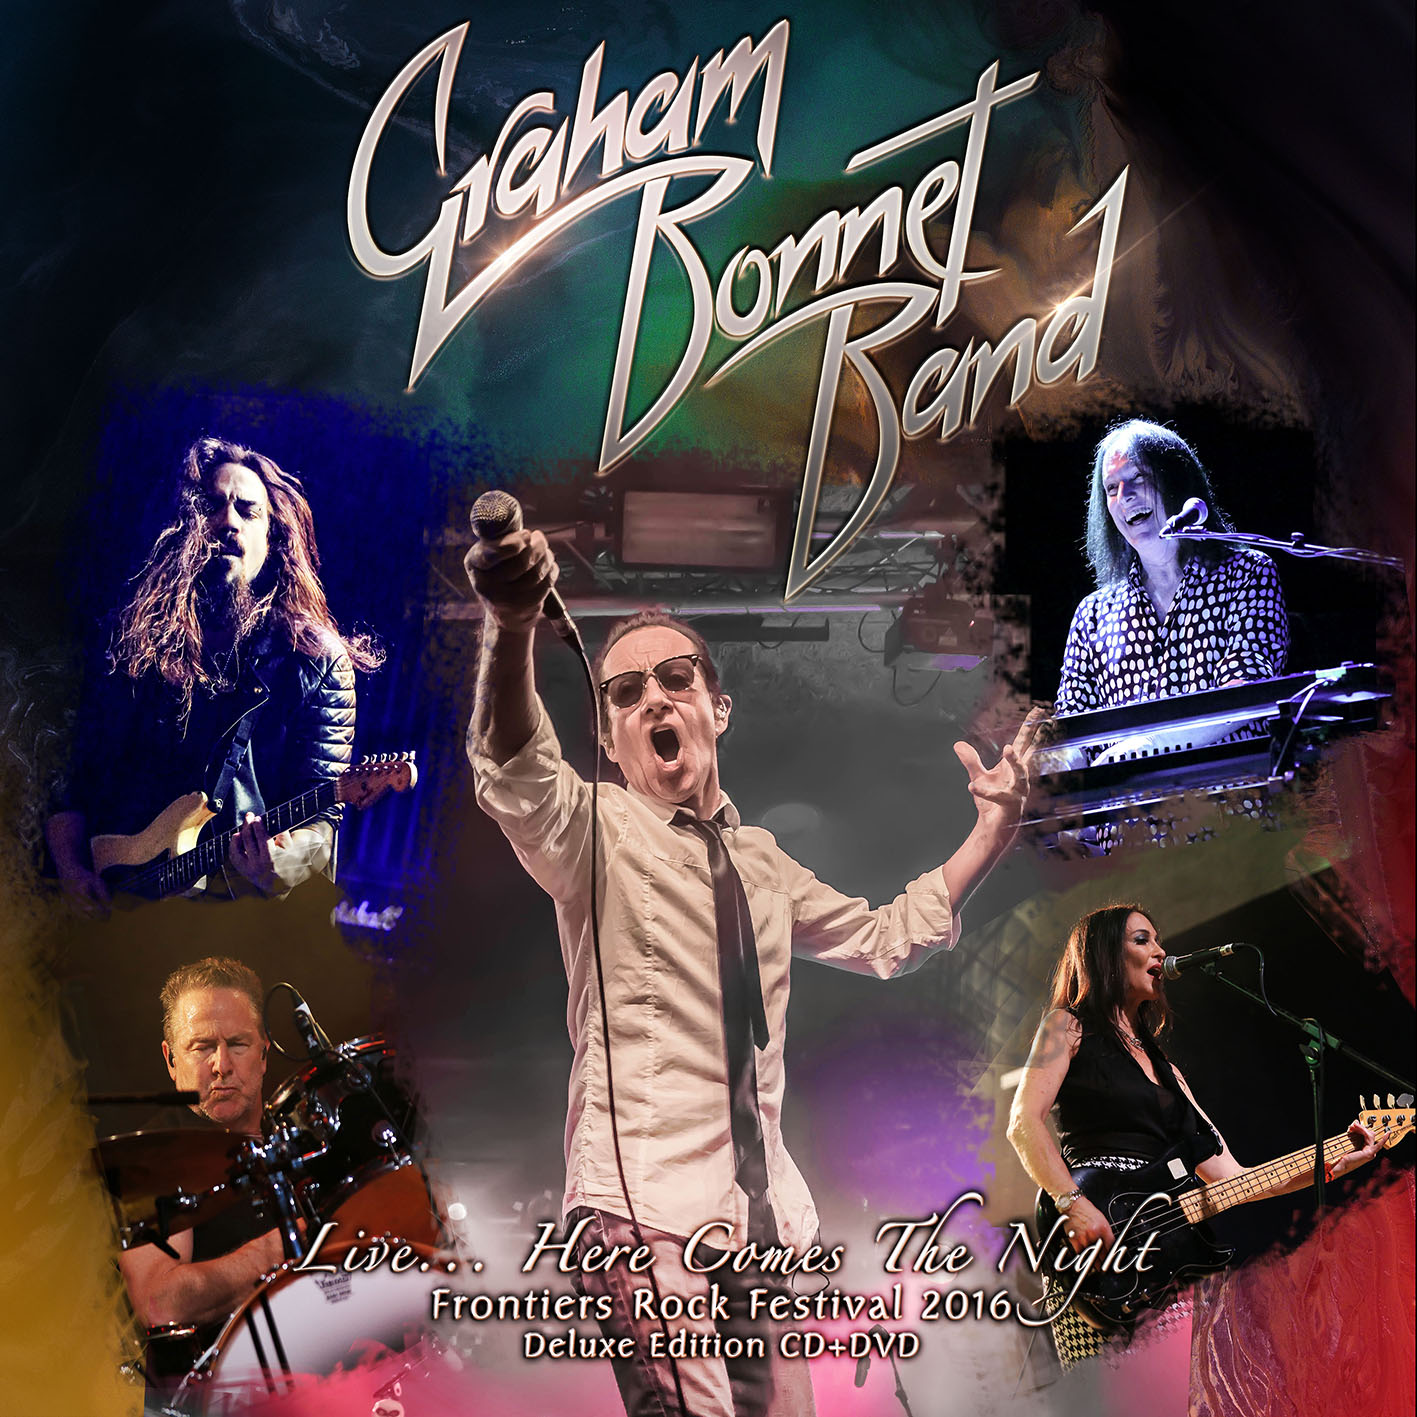 Graham Bonnet Band - Live… Here Comes The Night (Deluxe Edition)